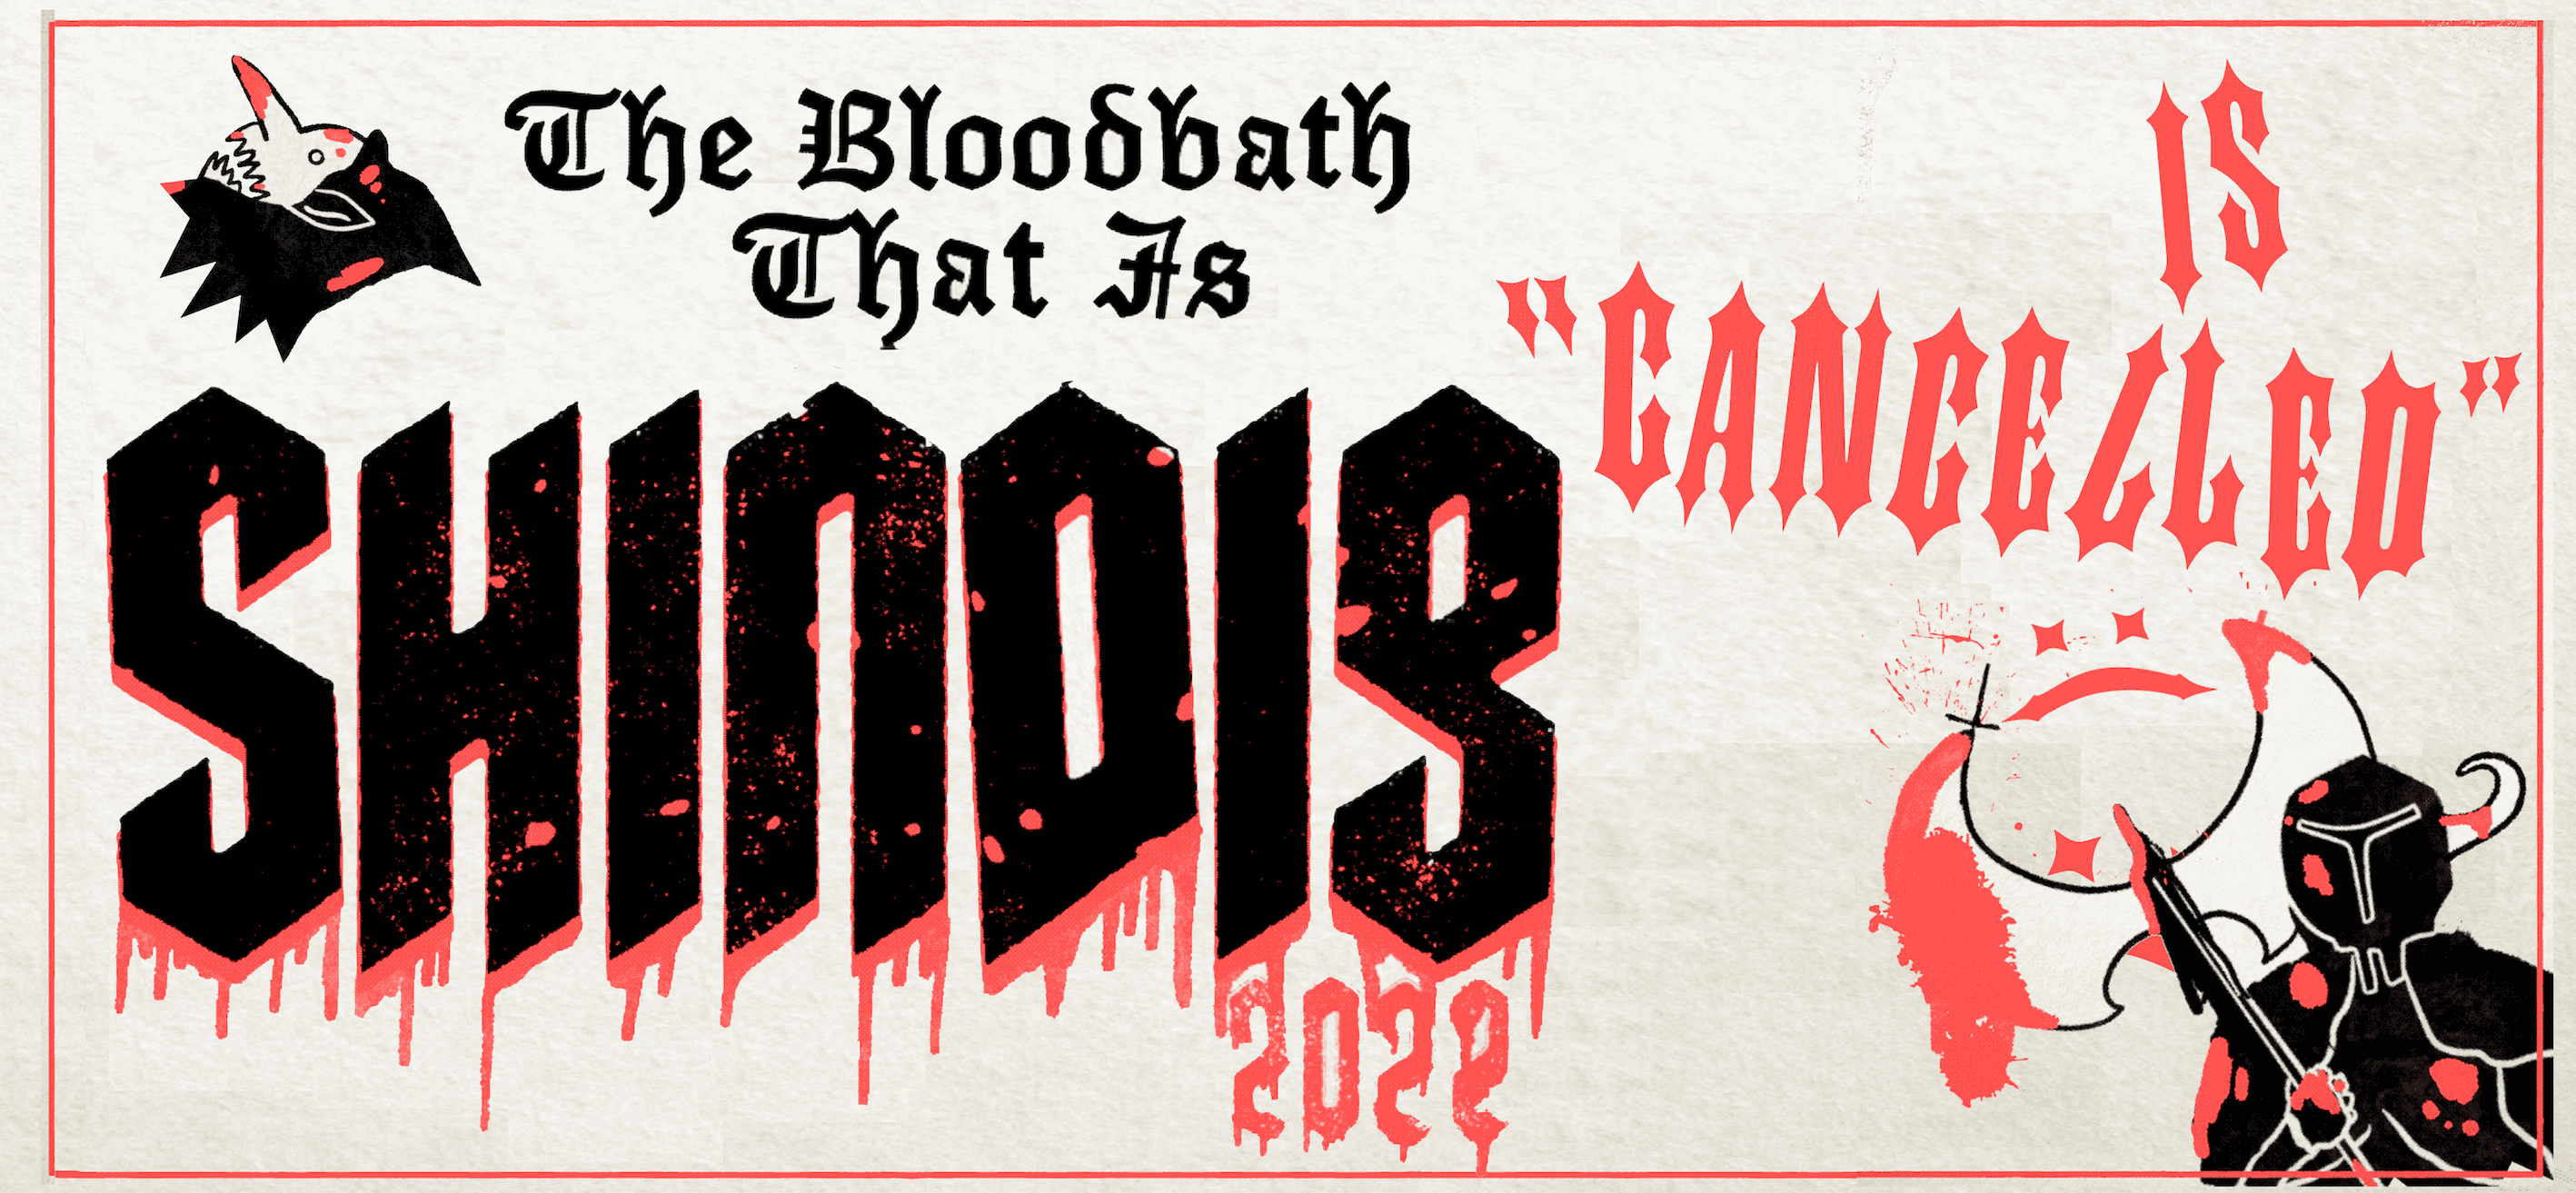 the bloodbath that is shindig 2022 is "cancelled"